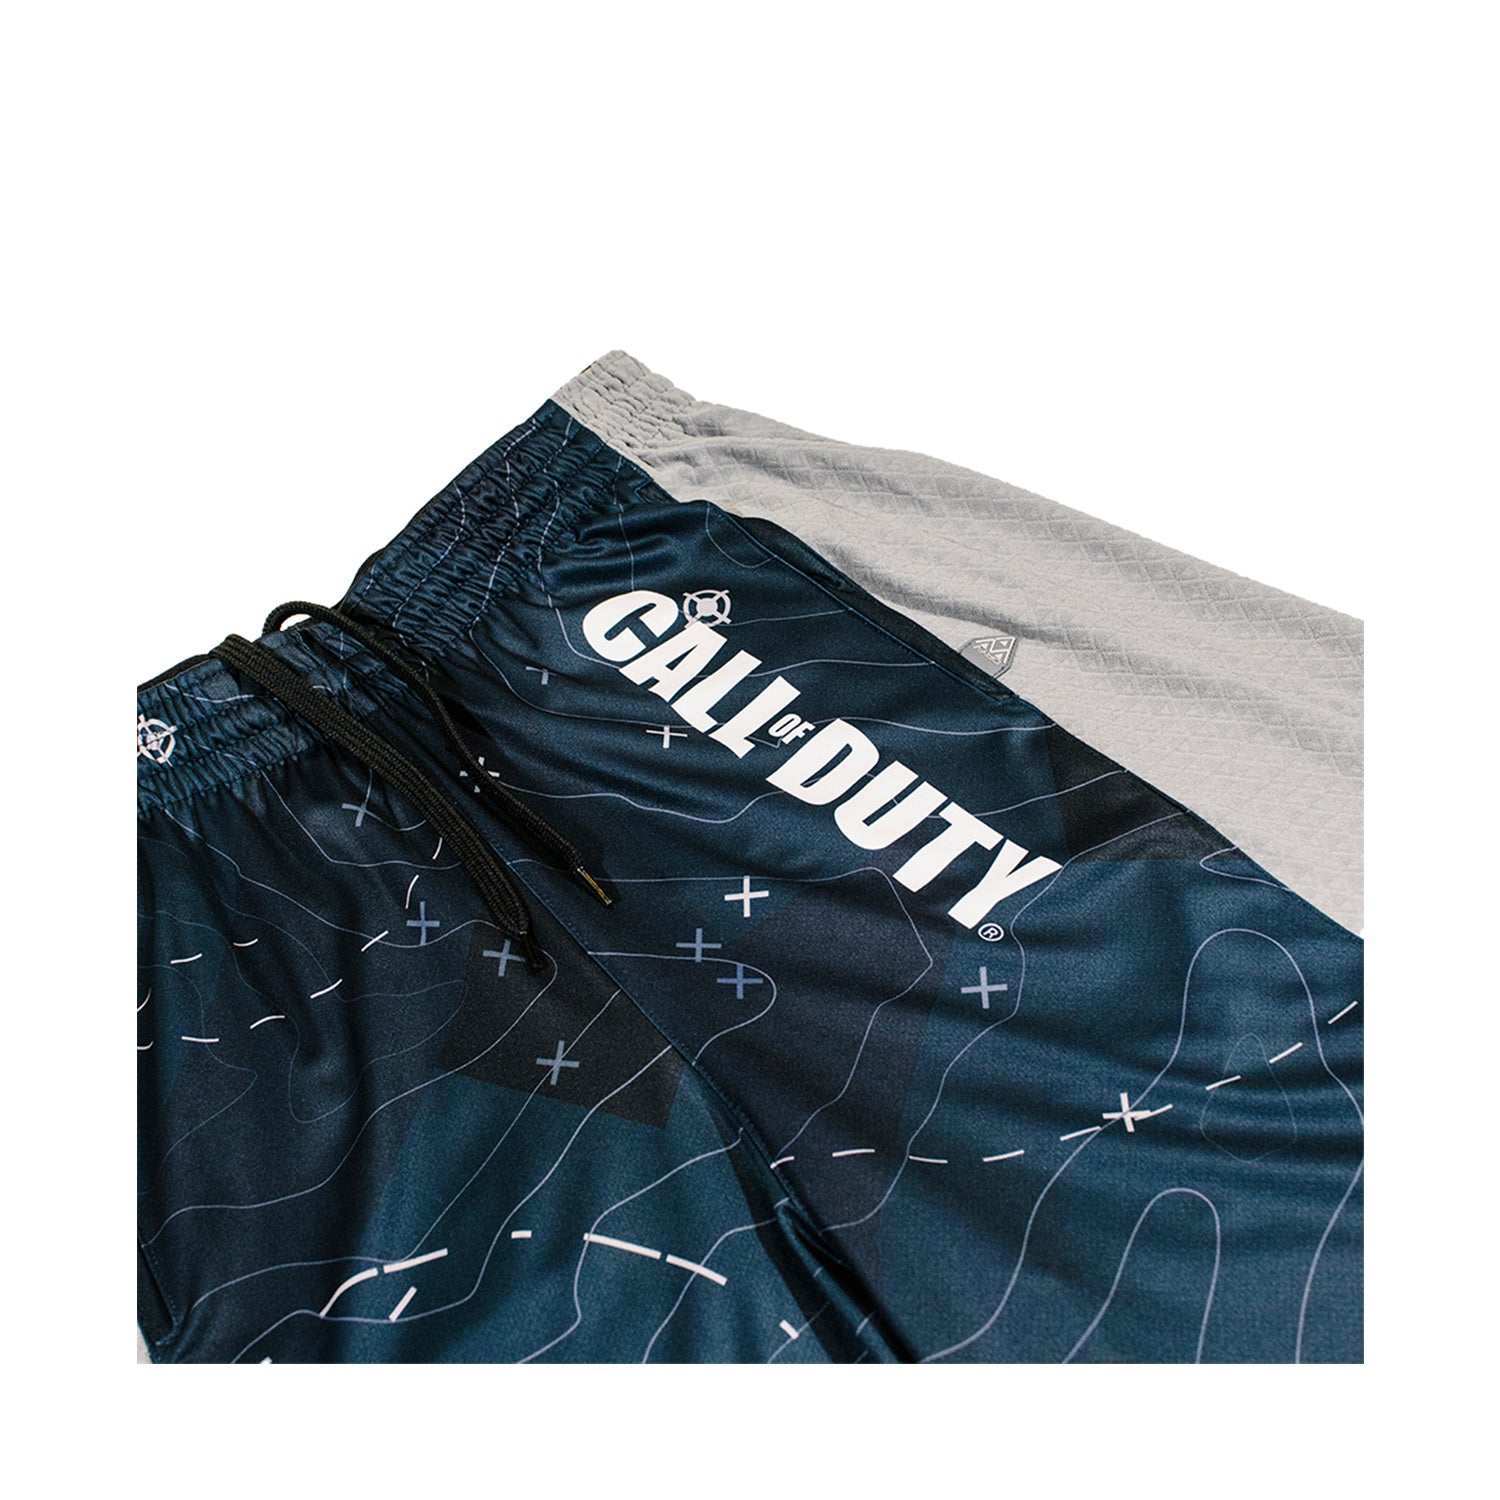 Call of Duty Point3 Blue Topographic Shorts - Close Up View